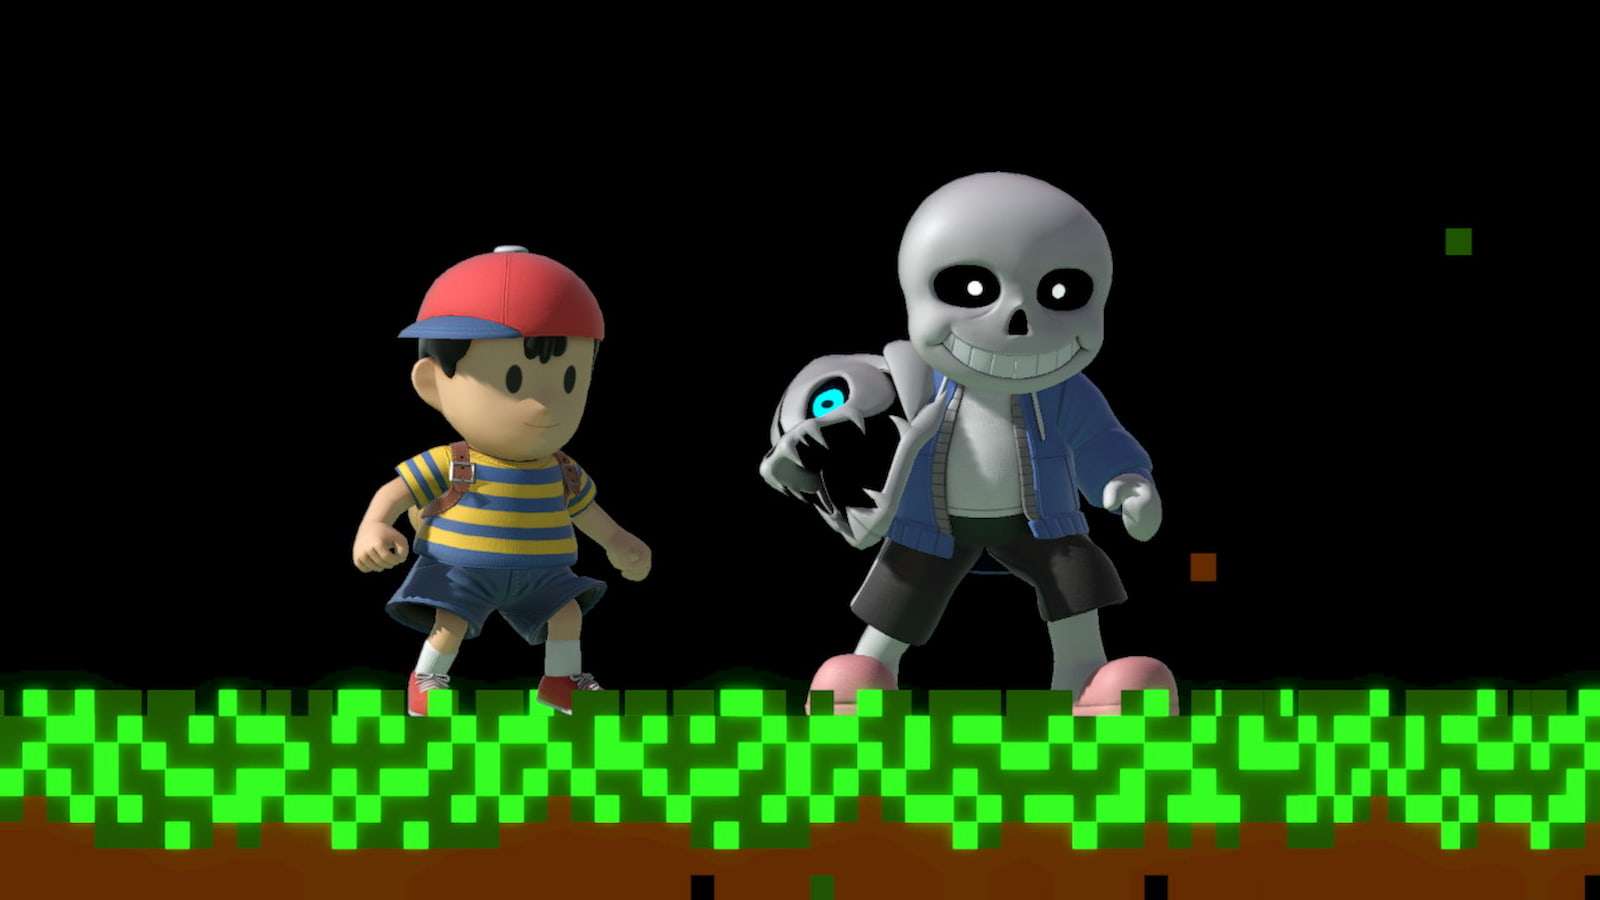 Ness and a Sans Mii Gunner in Super Smash Bros Ultimate